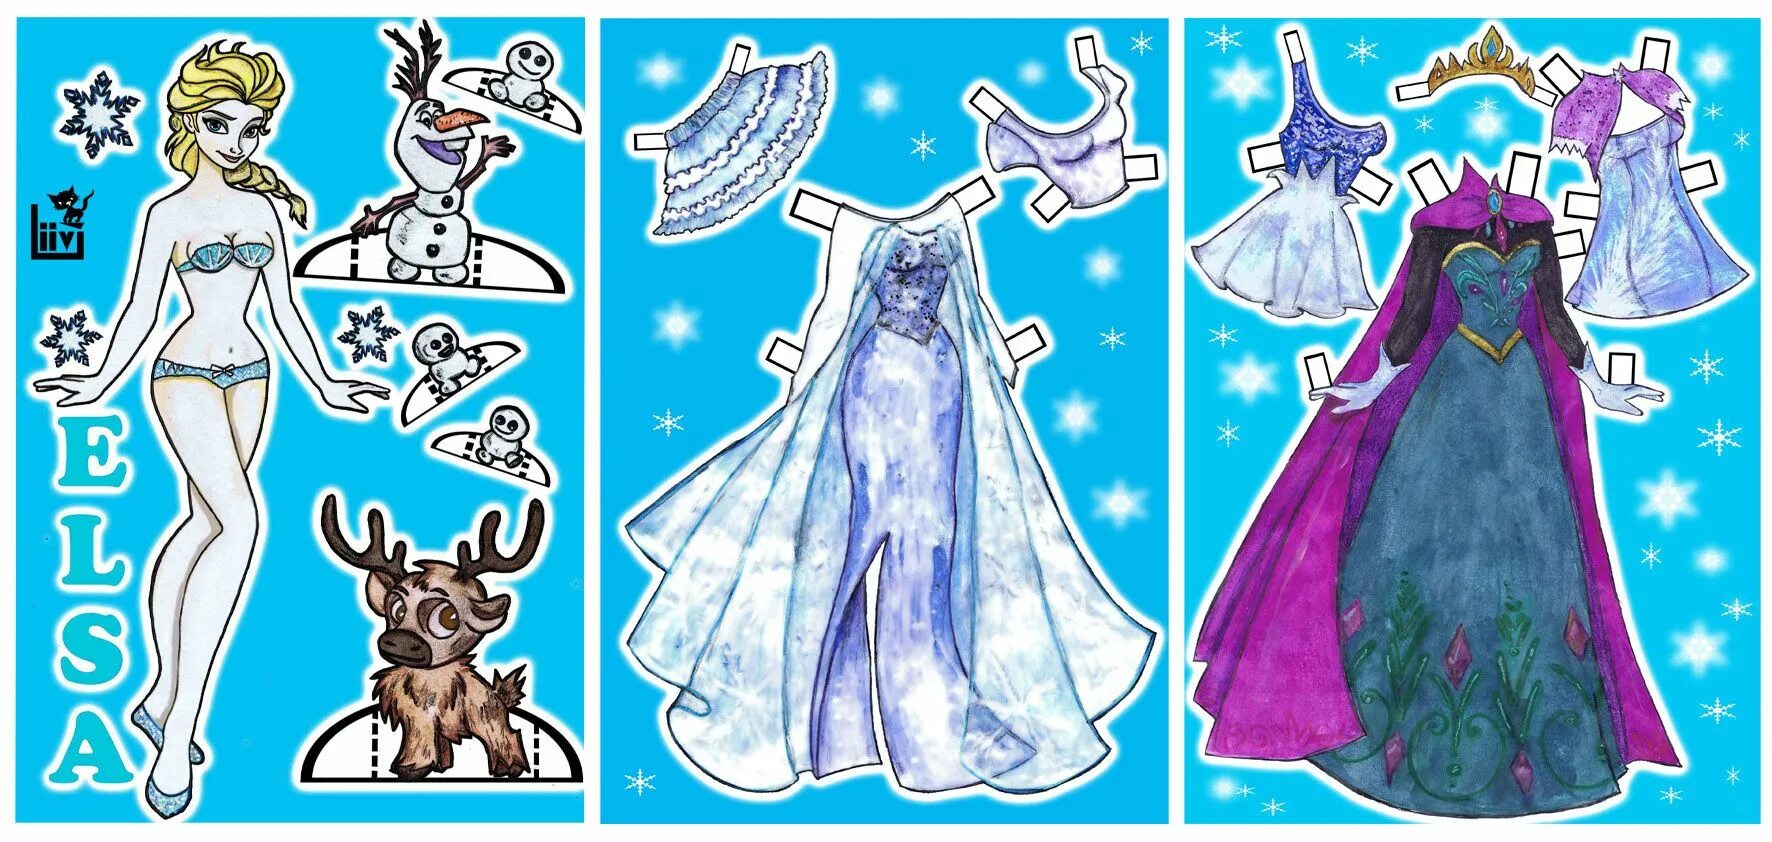 Elsa paper doll with cut out clothes #4